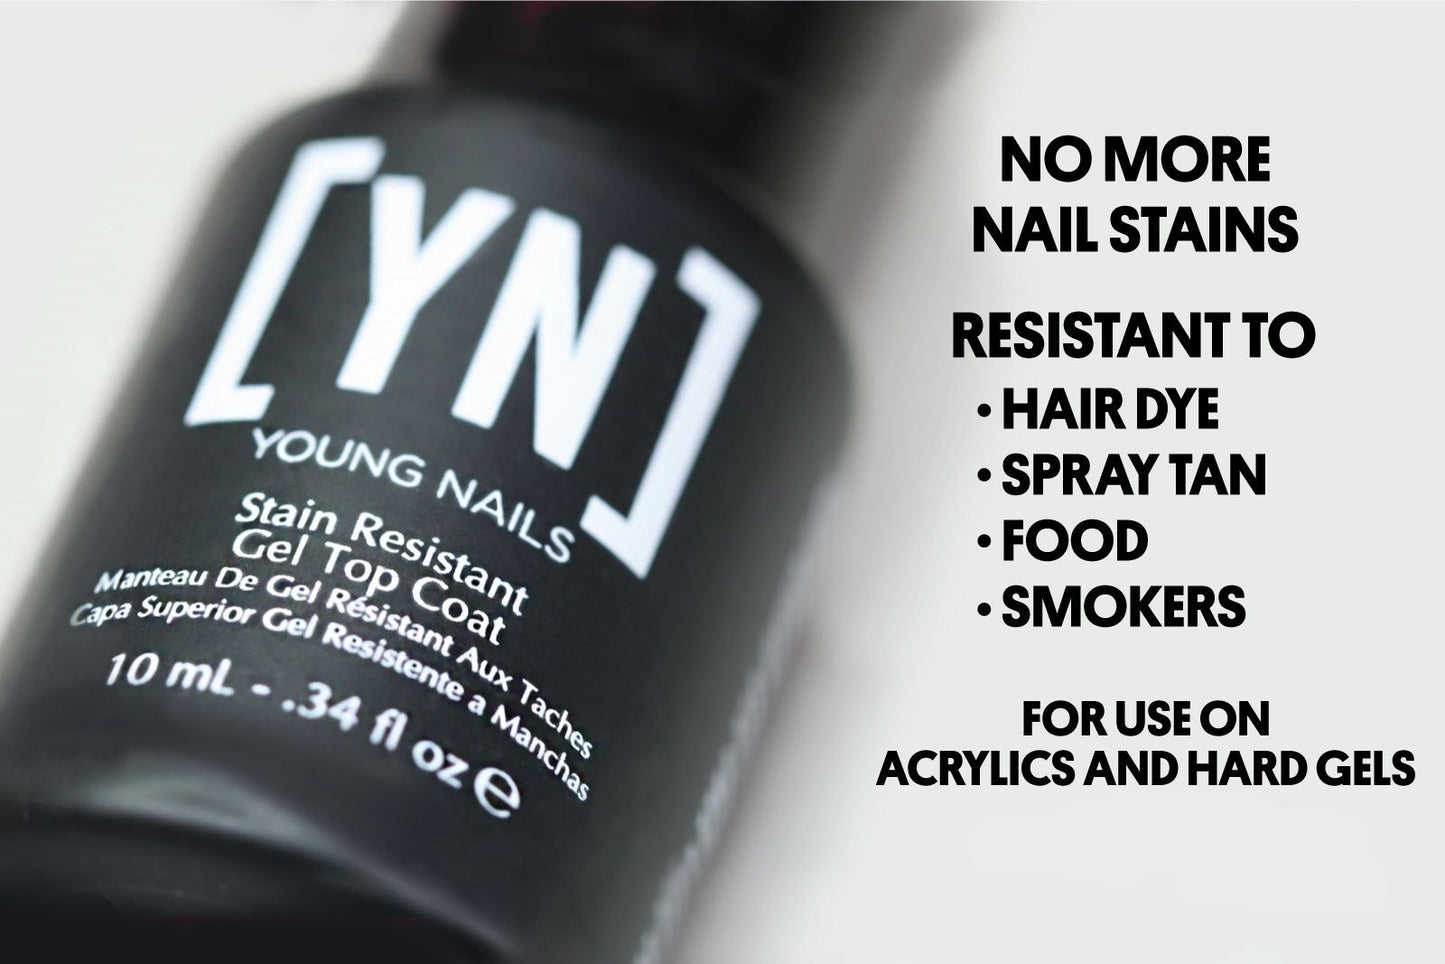 
                  
                    Young Nails - Stain Resistant Top Coat
                  
                